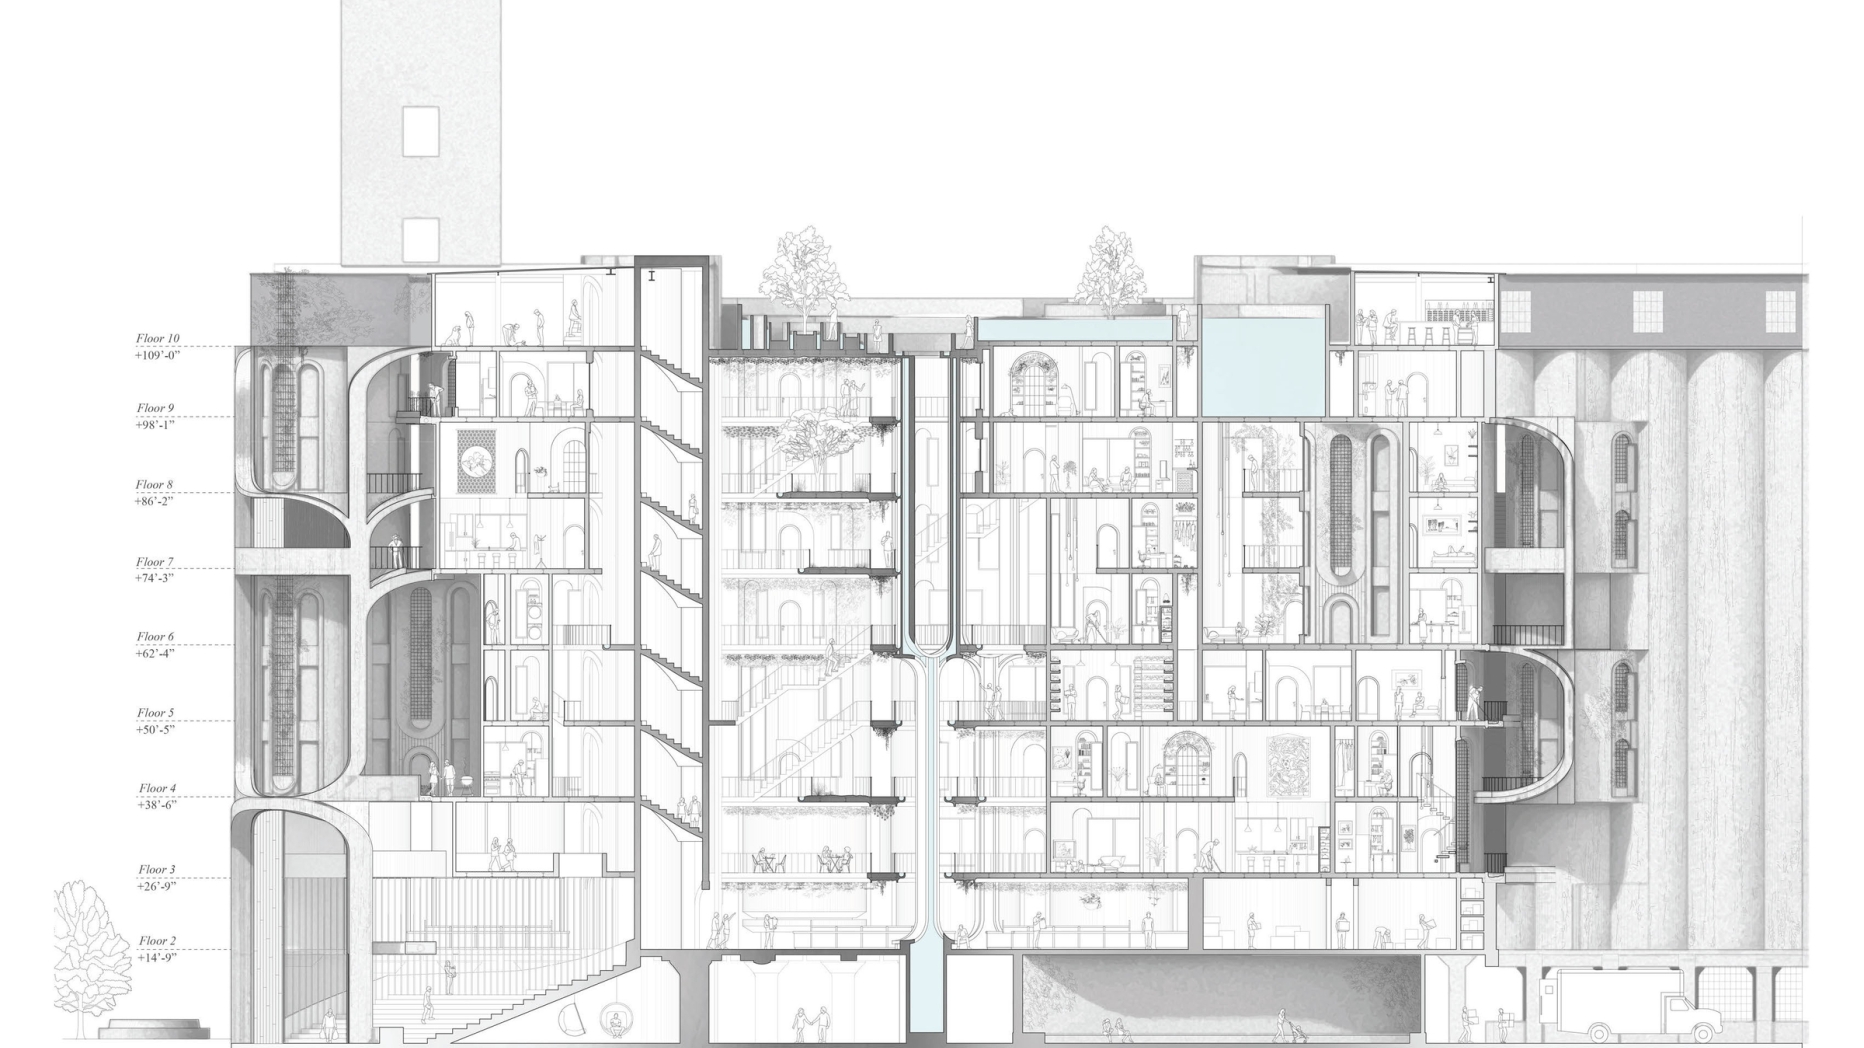 Cutaway drawing of apartment complex/marketplace with many green spaces and balconies